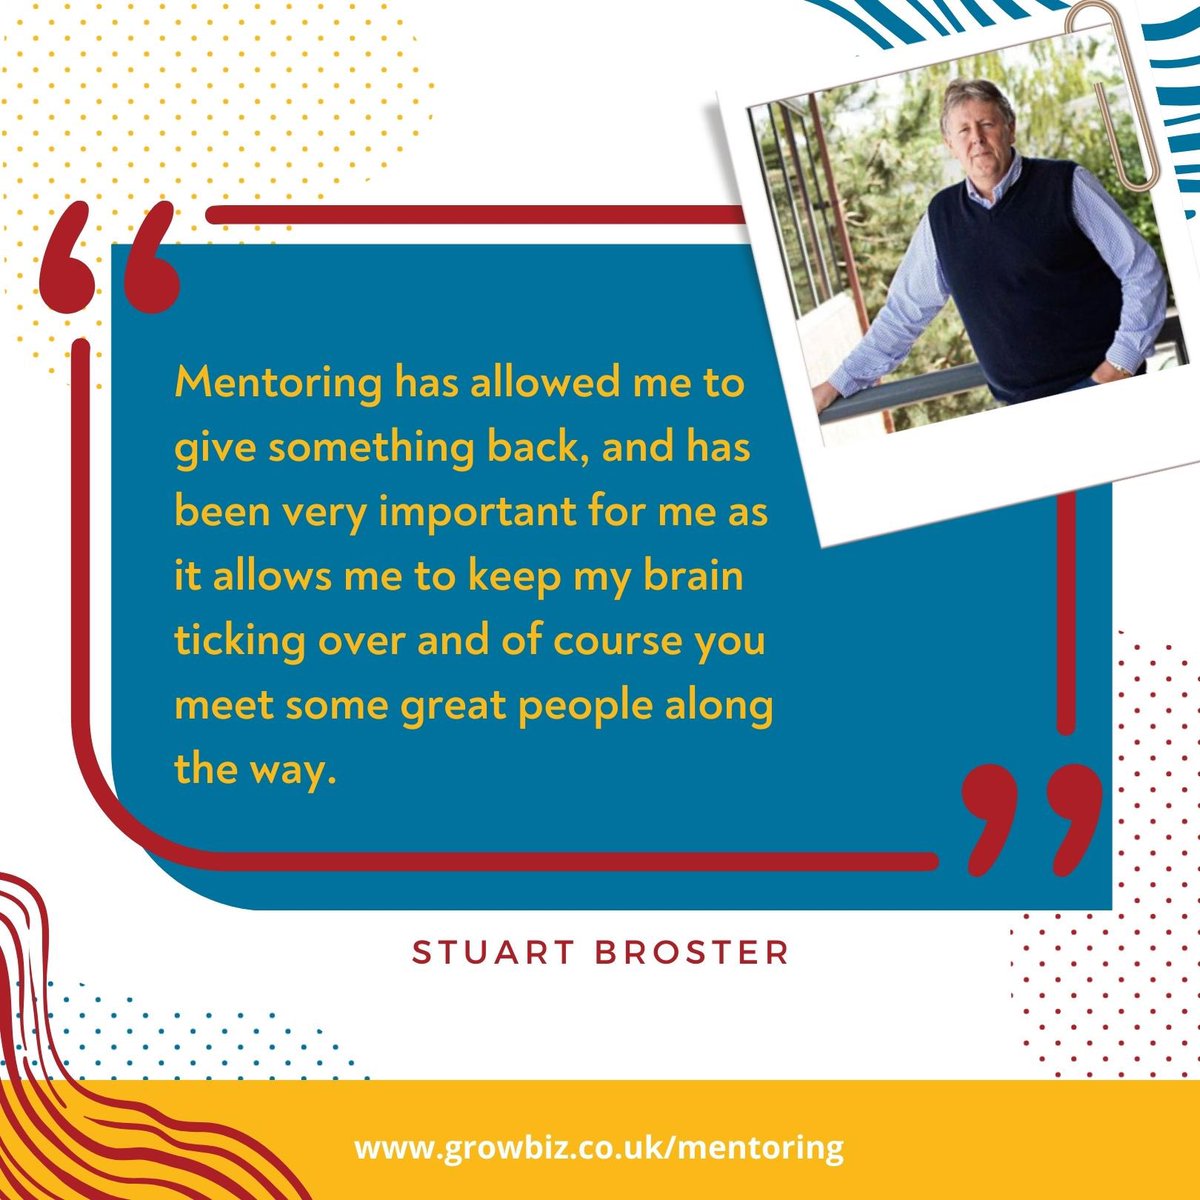 #NationalMentoringDay is here! 

Why volunteer as a GrowBiz mentor? Stuart Broster says it allows him to give something back and keeps his brain ticking over, plus he’s met some great people through the process.